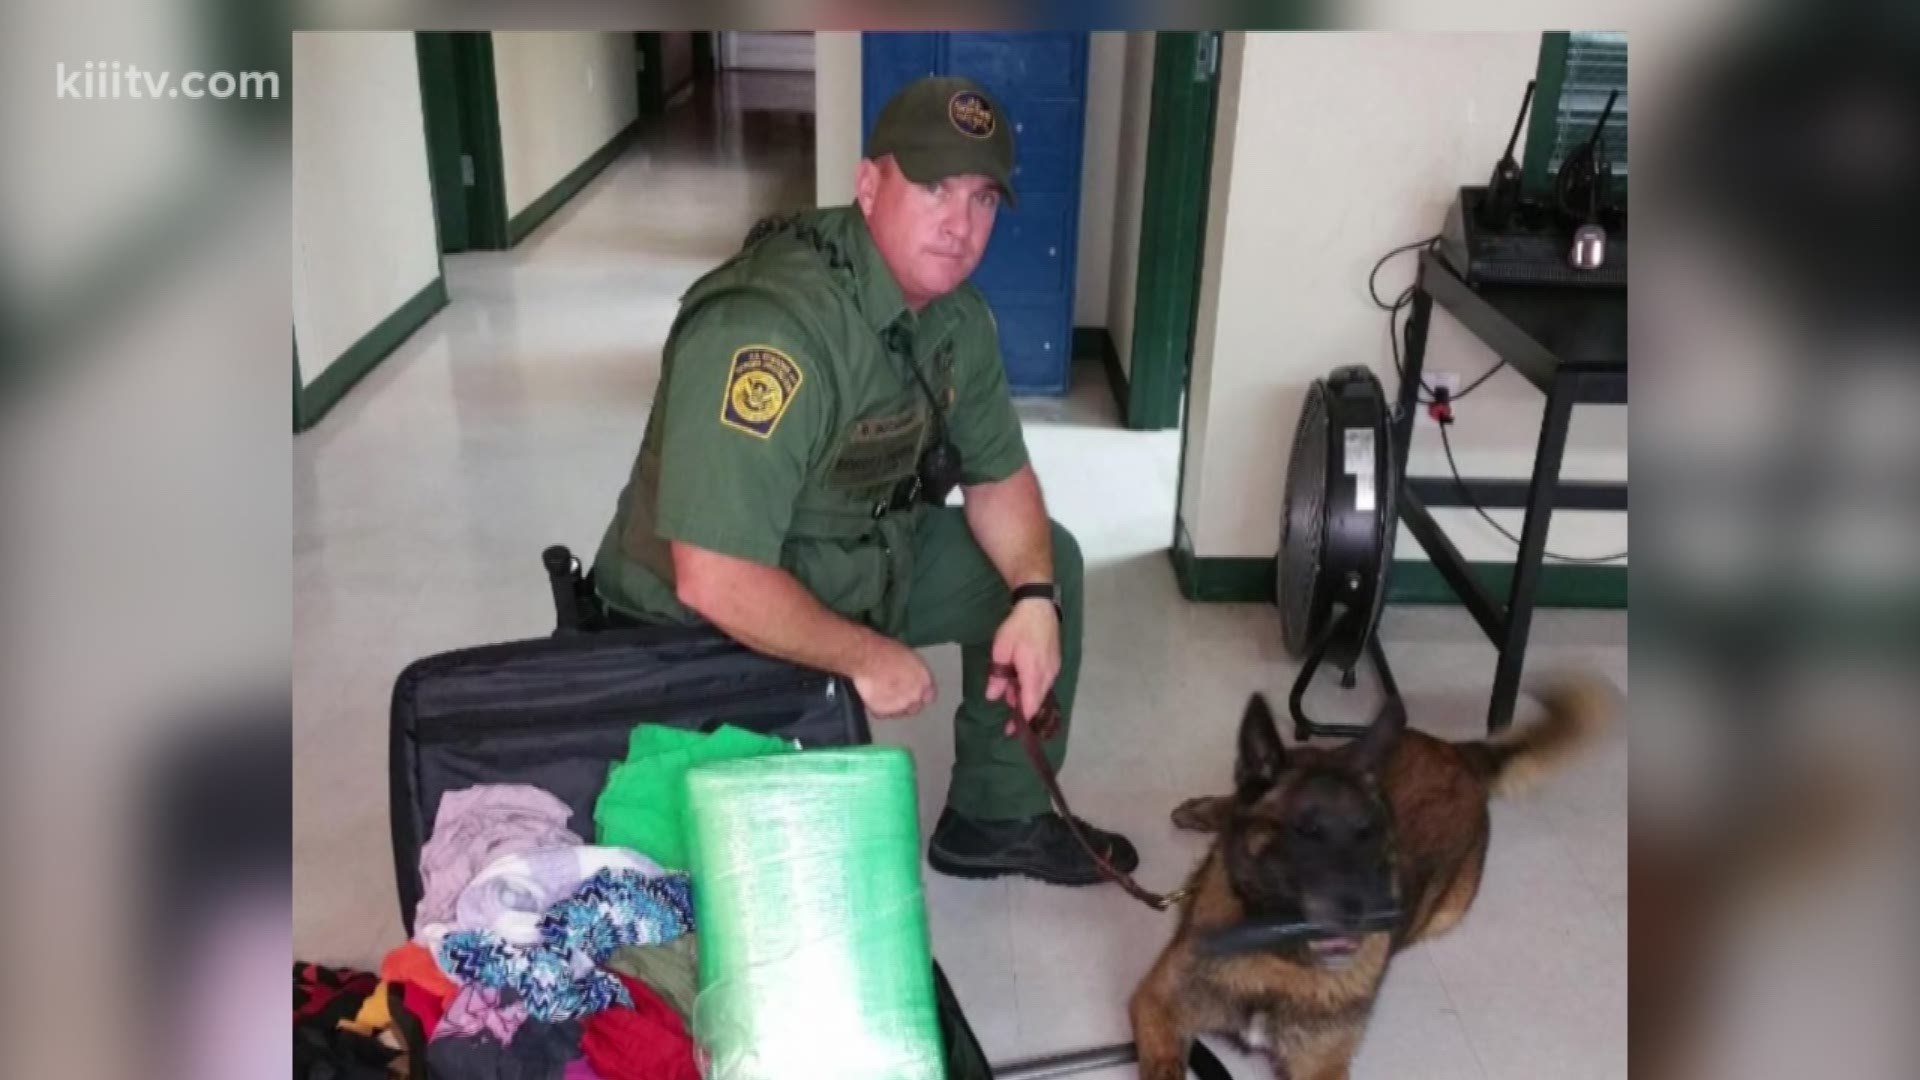 A Border Patrol agent is fighting to get ownership of his retired K-9 partner after working together for over five years.